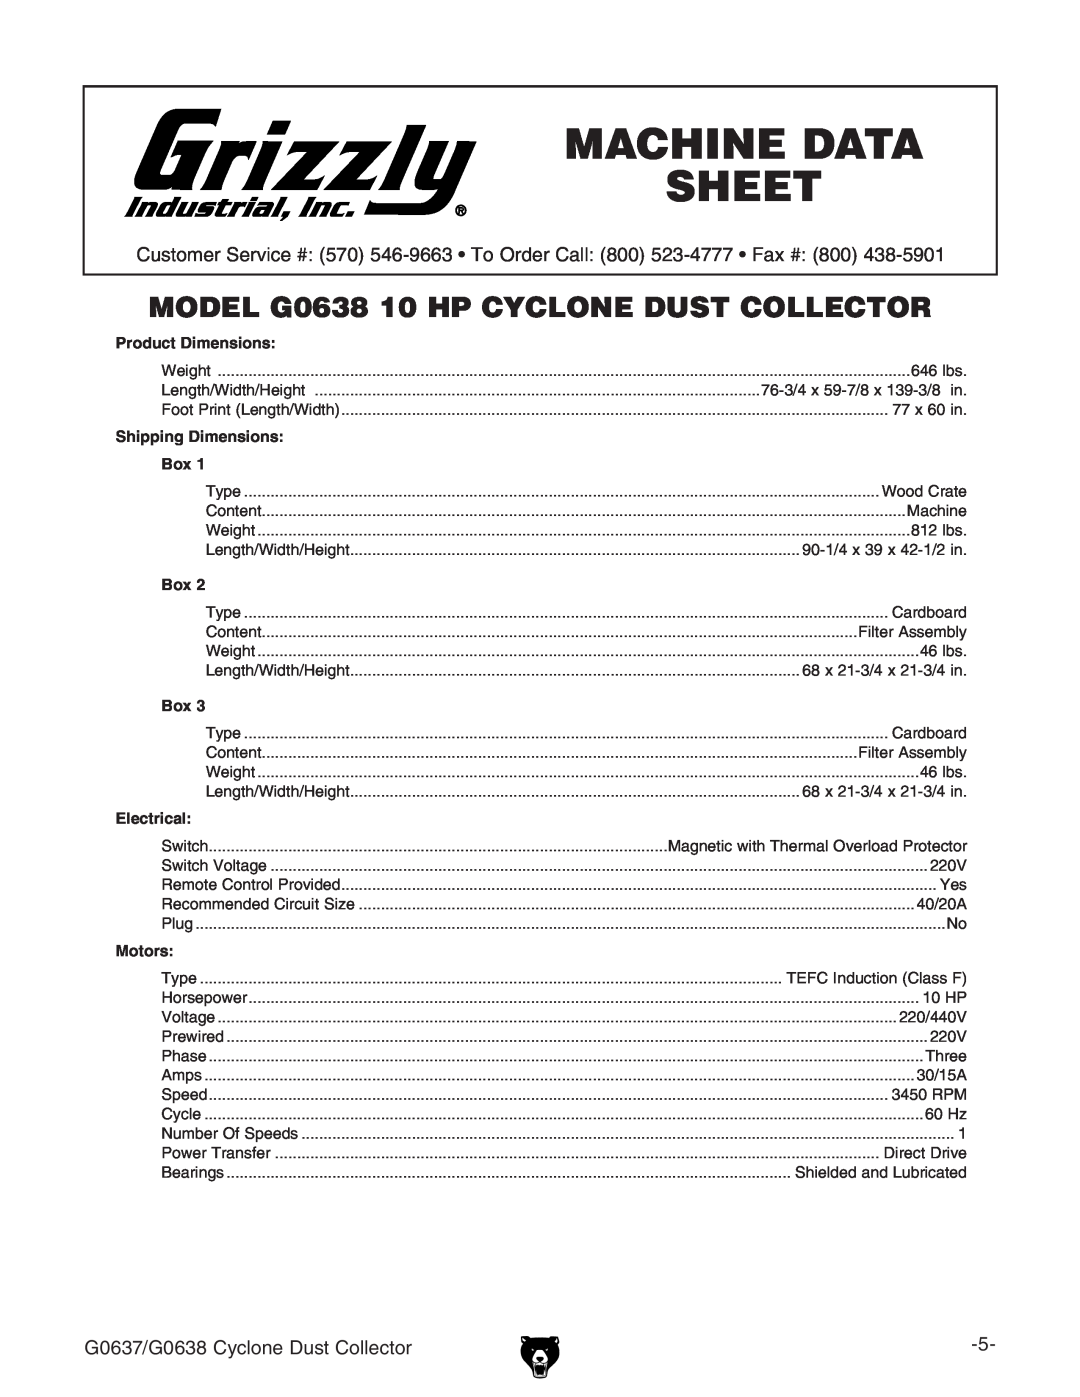 Grizzly owner manual G0638 Machine Data Sheet G0638 Data Sheet, G0637/G0638 Cyclone Dust Collector 